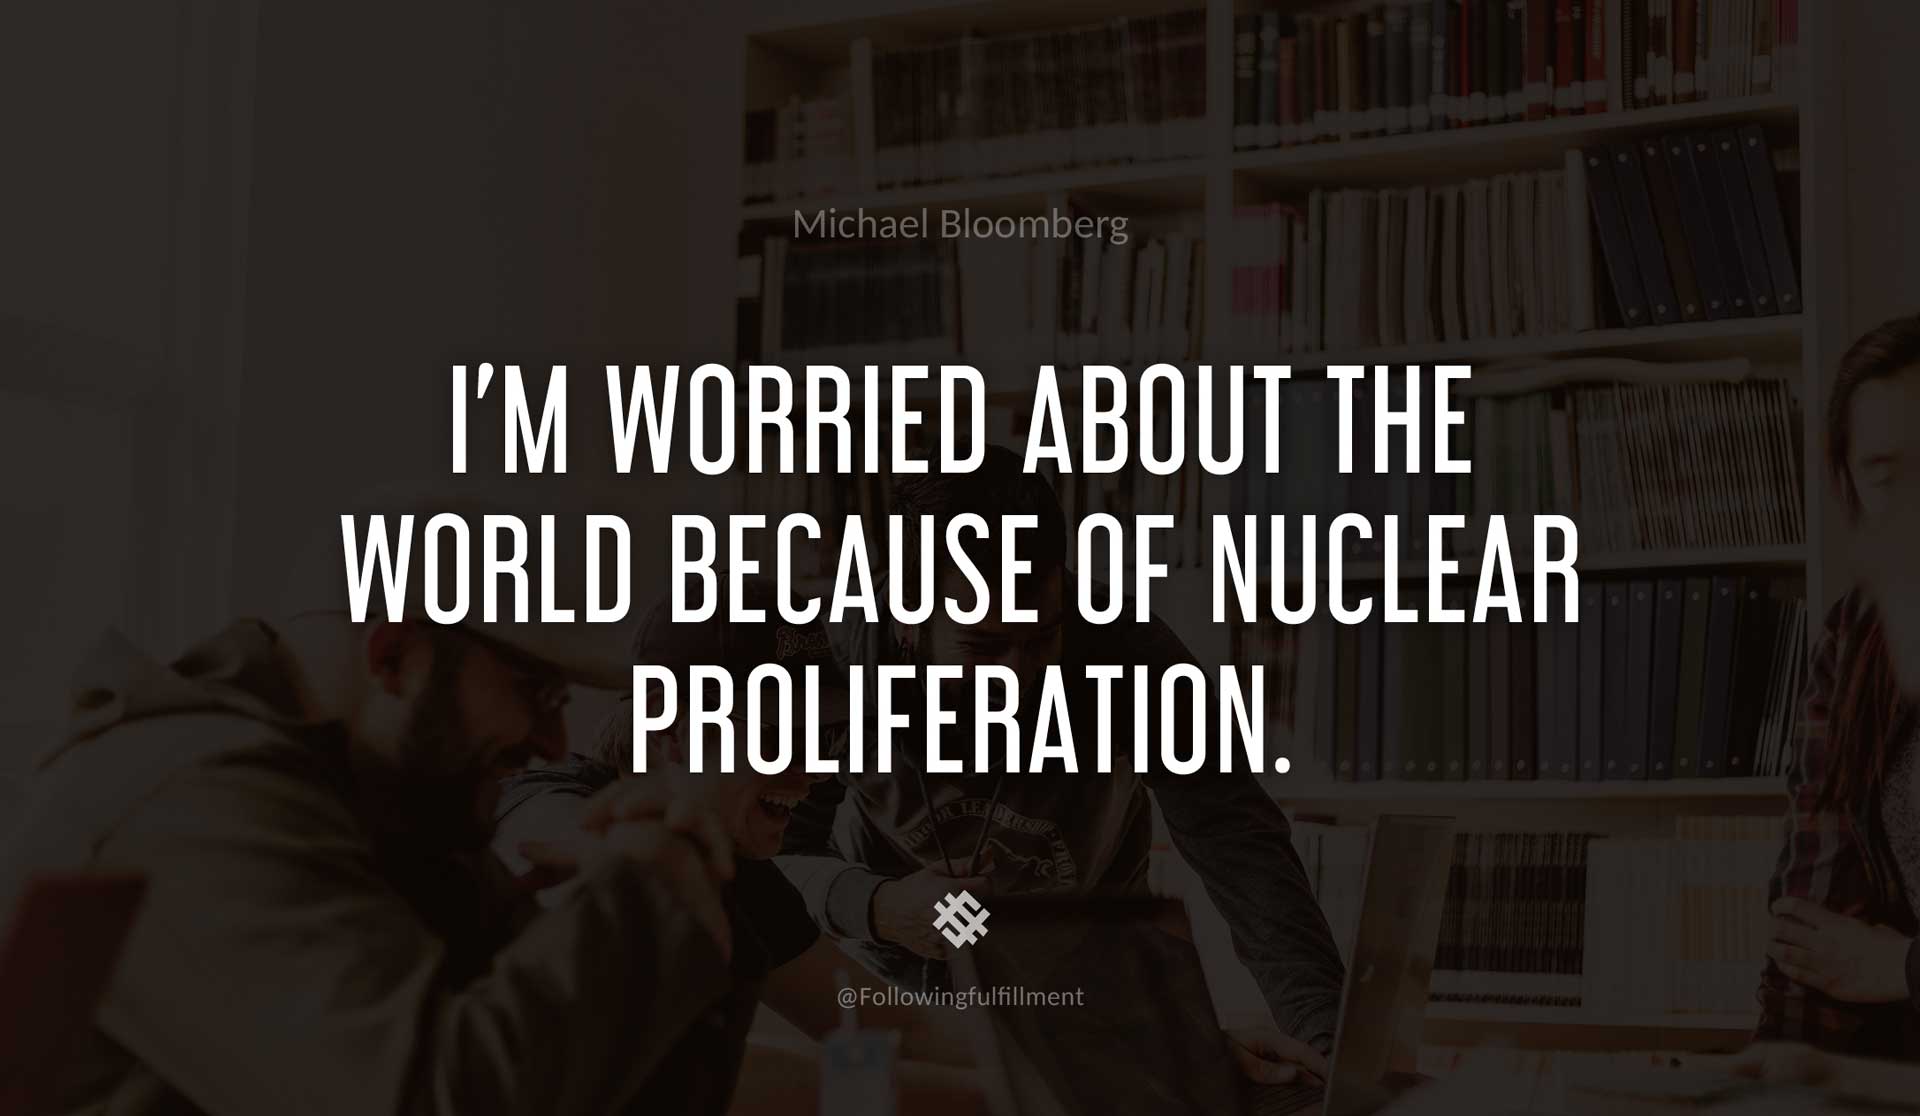 I'm-worried-about-the-world-because-of-nuclear-proliferation.-MICHAEL-BLOOMBERG-Quote.jpg